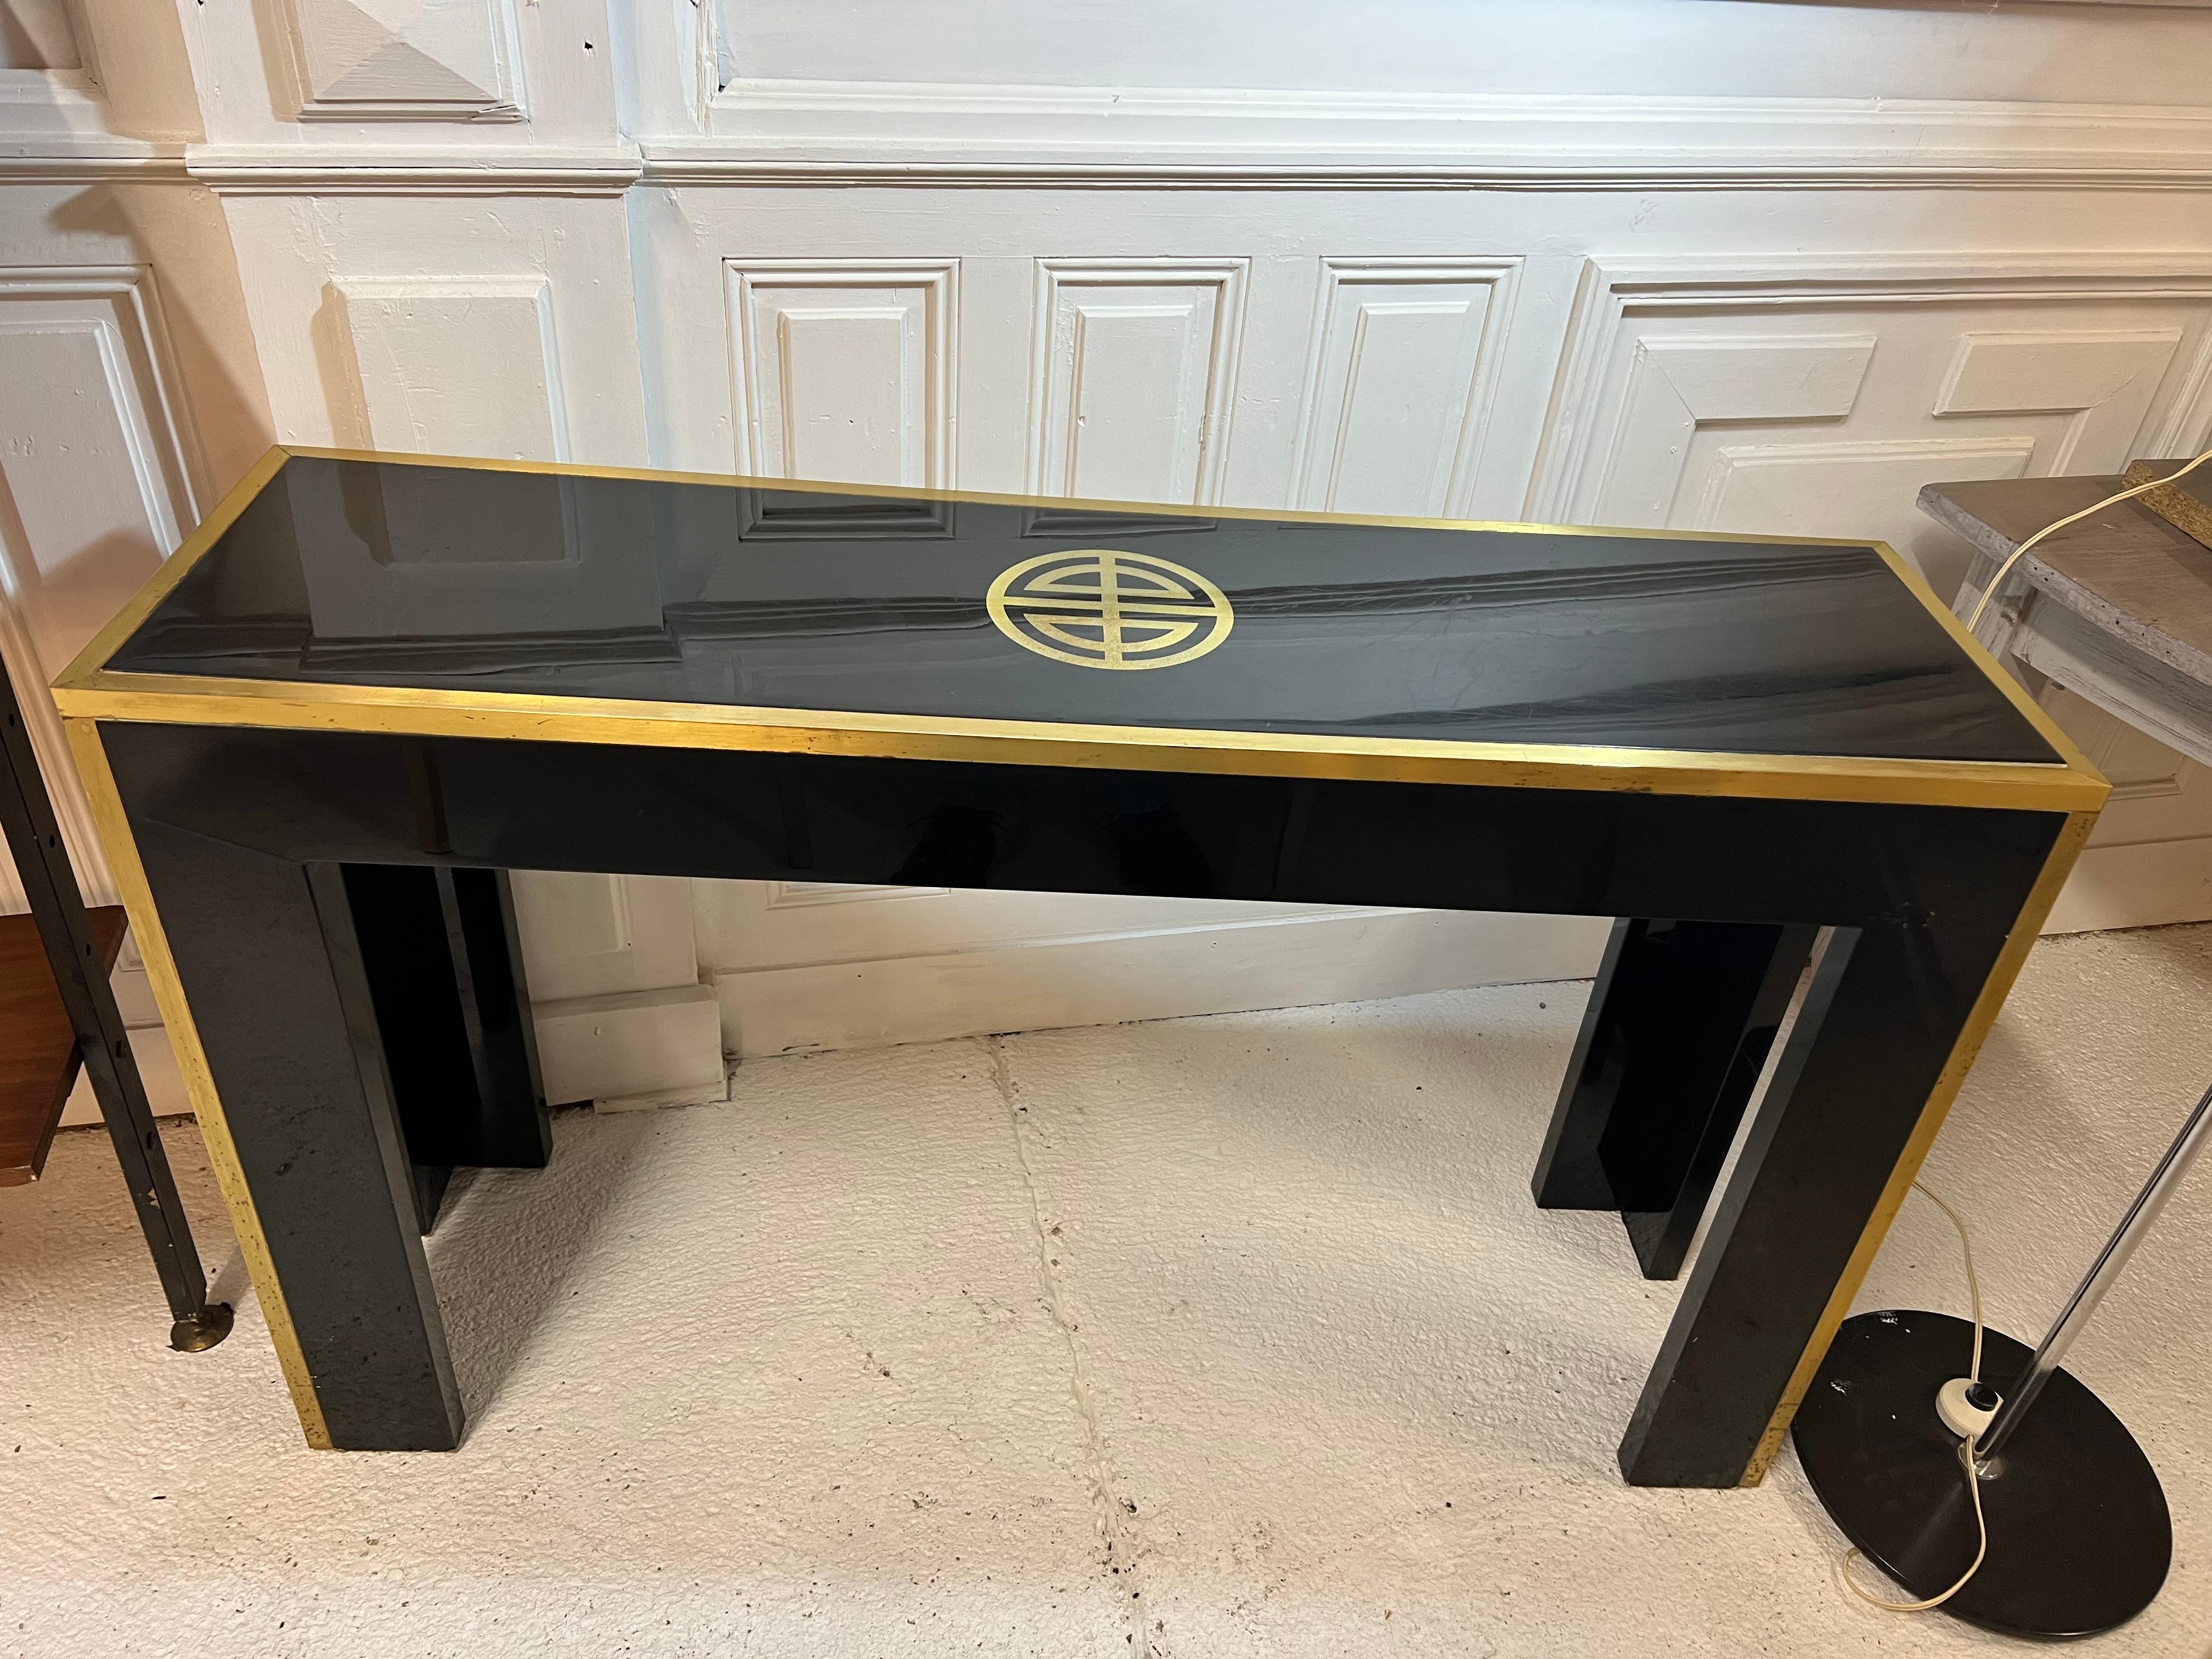 black lacquered and brass console by Guy Lefevre distributed by Jansen
its tray is monogrammed in a very 70's style

